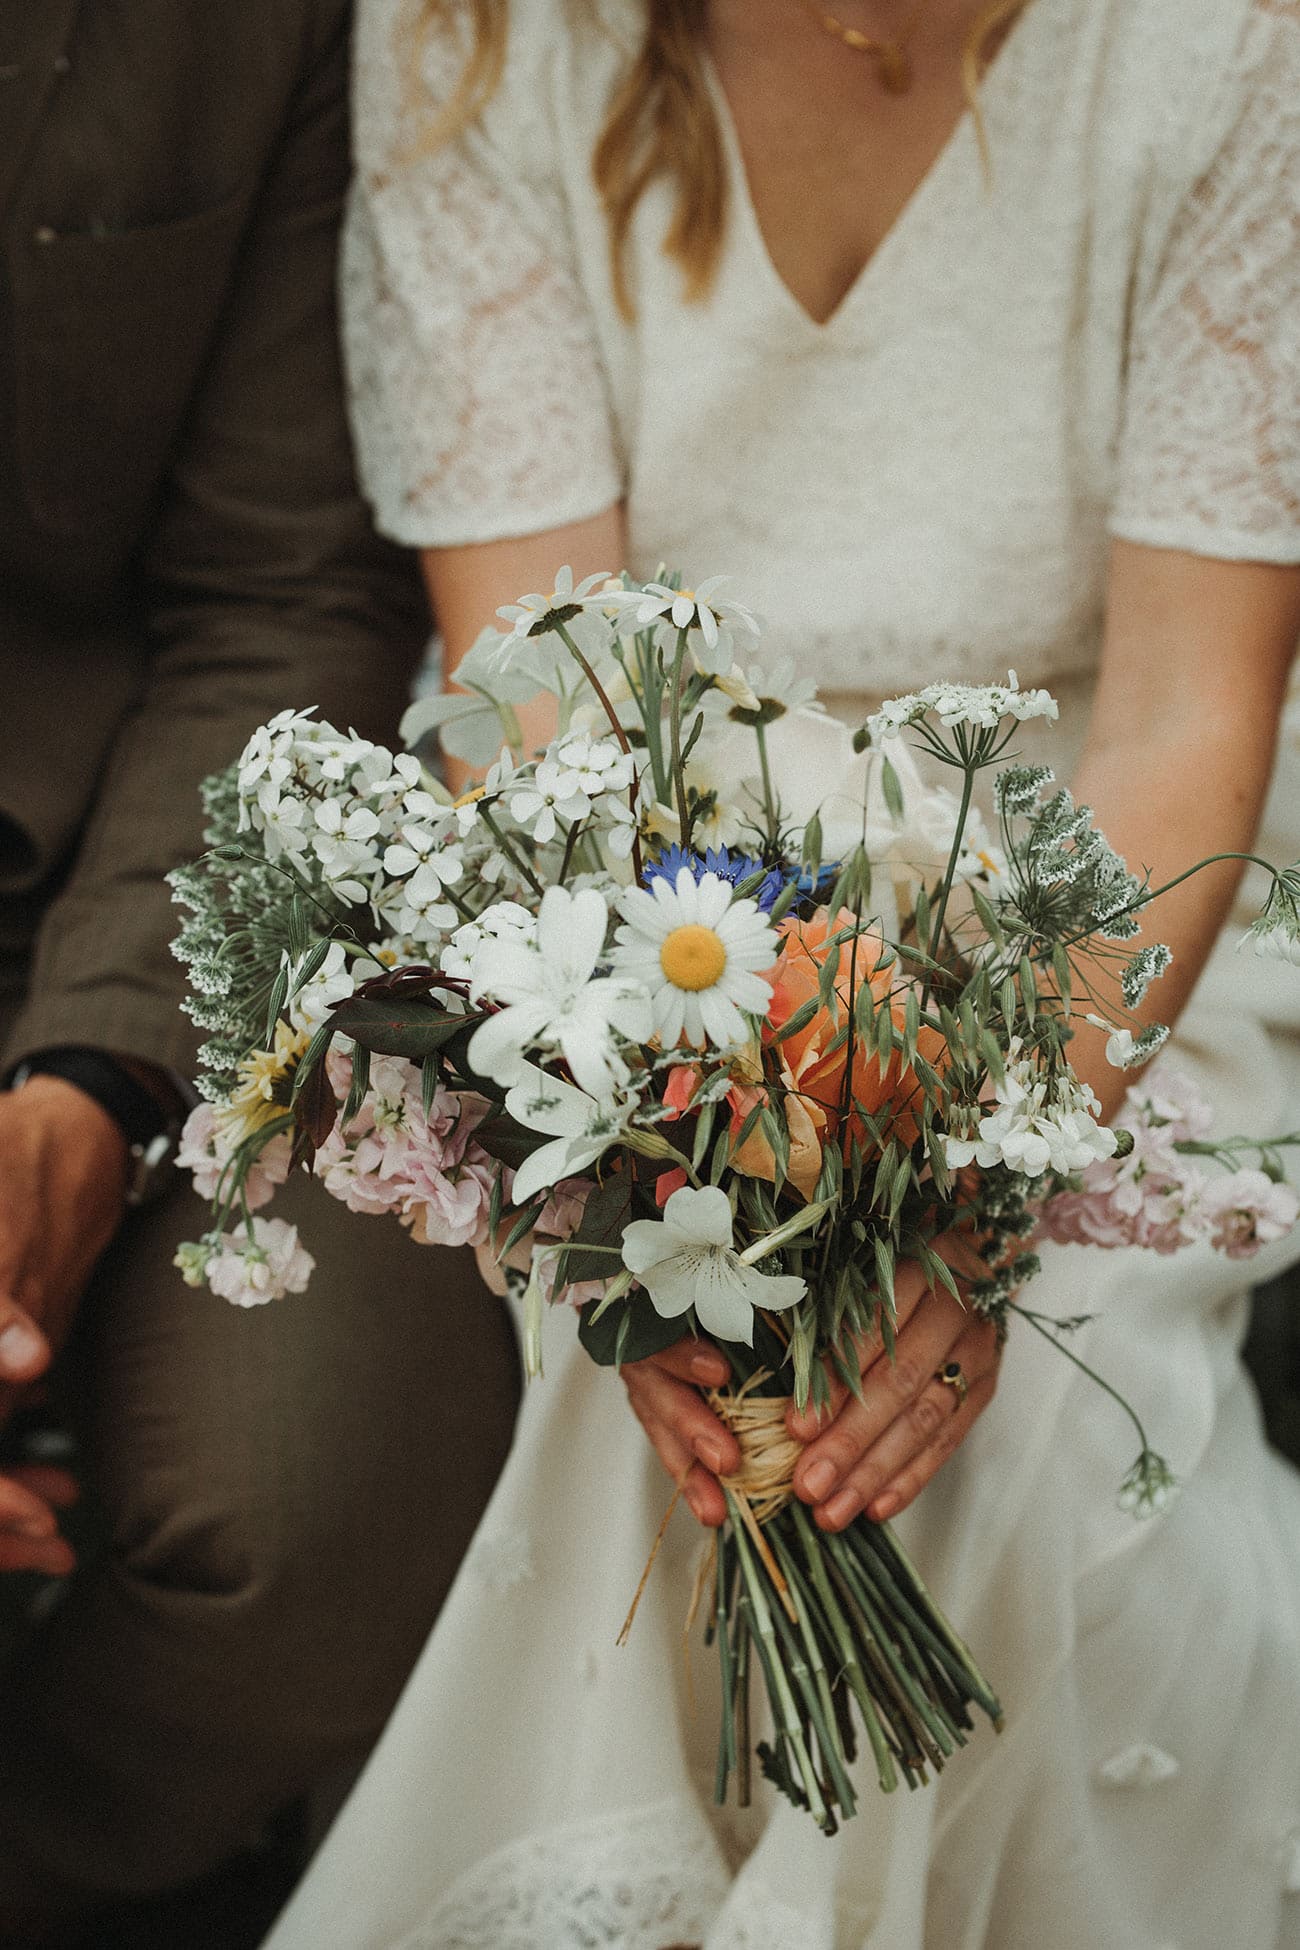 Bride's bouquet made of wildflowers